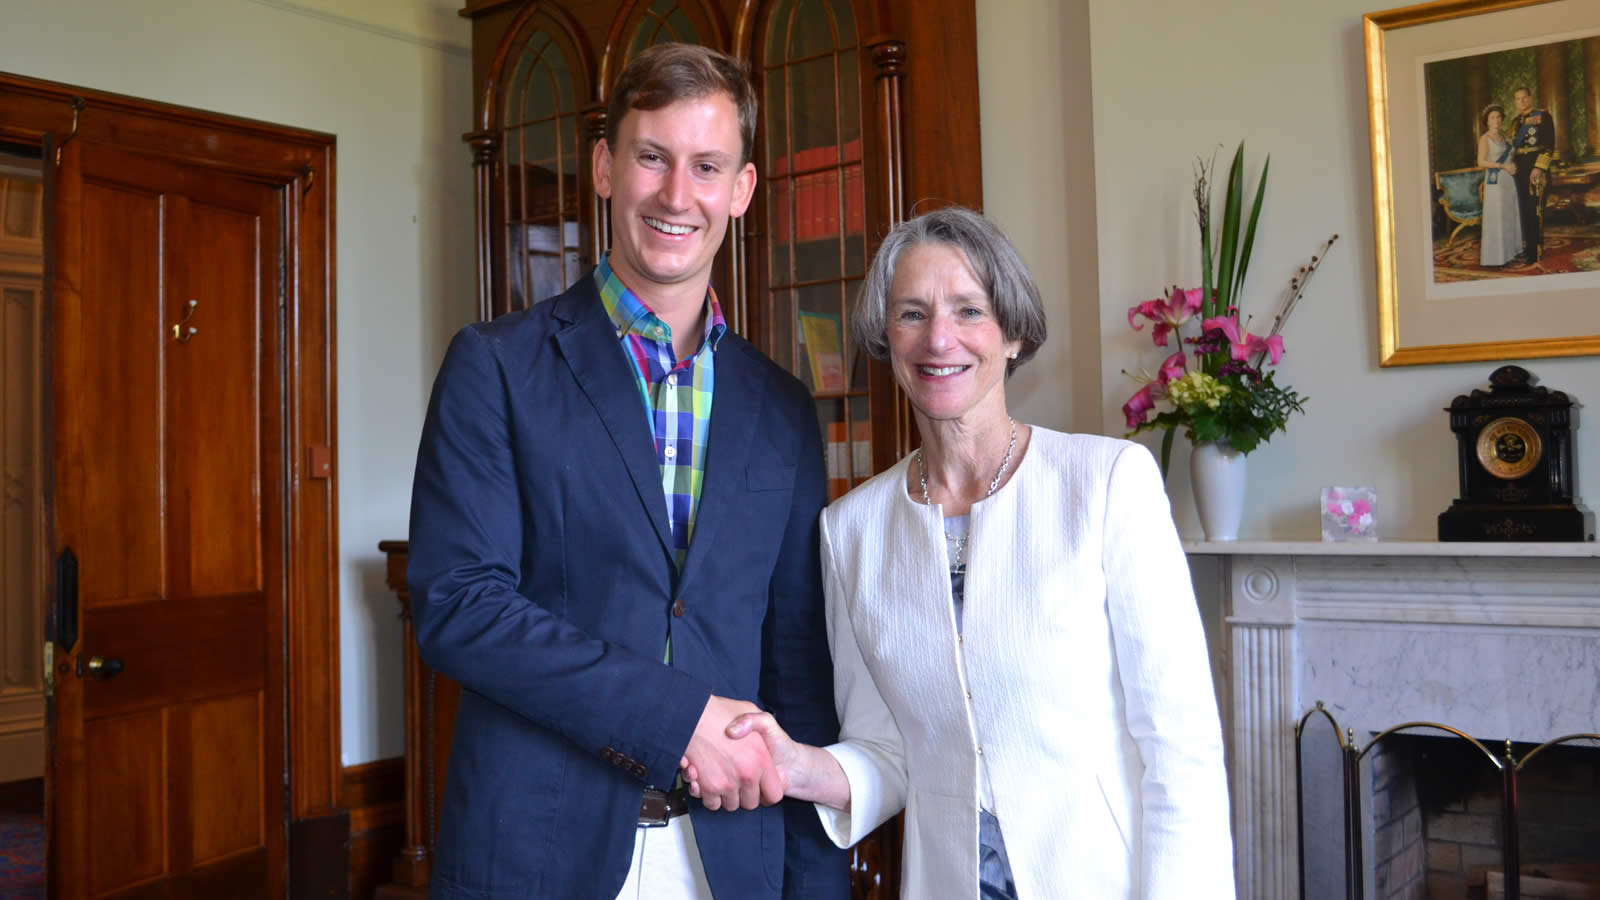 Henry West (’11) with Her Excellency Professor the Honourable Kate Warner AM, Governor of Tasmania (Photo Courtesy of the University of Tasmania)